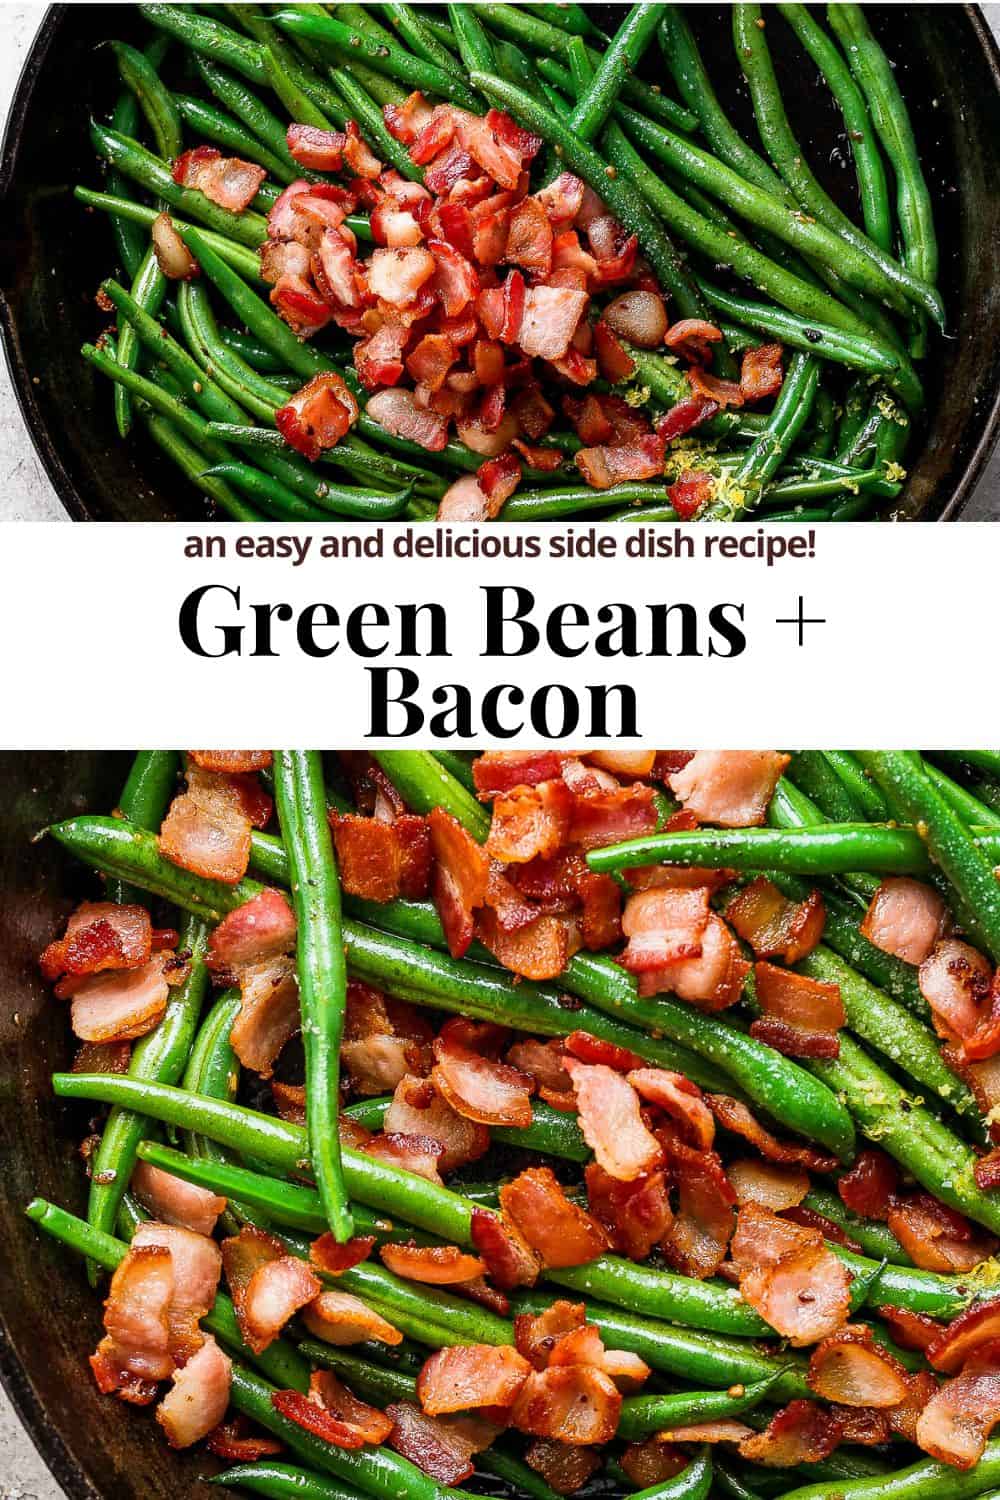 Pinterest image that shows green beans with bacon with the title "green beans + bacon. an easy and delicious side dish recipe."